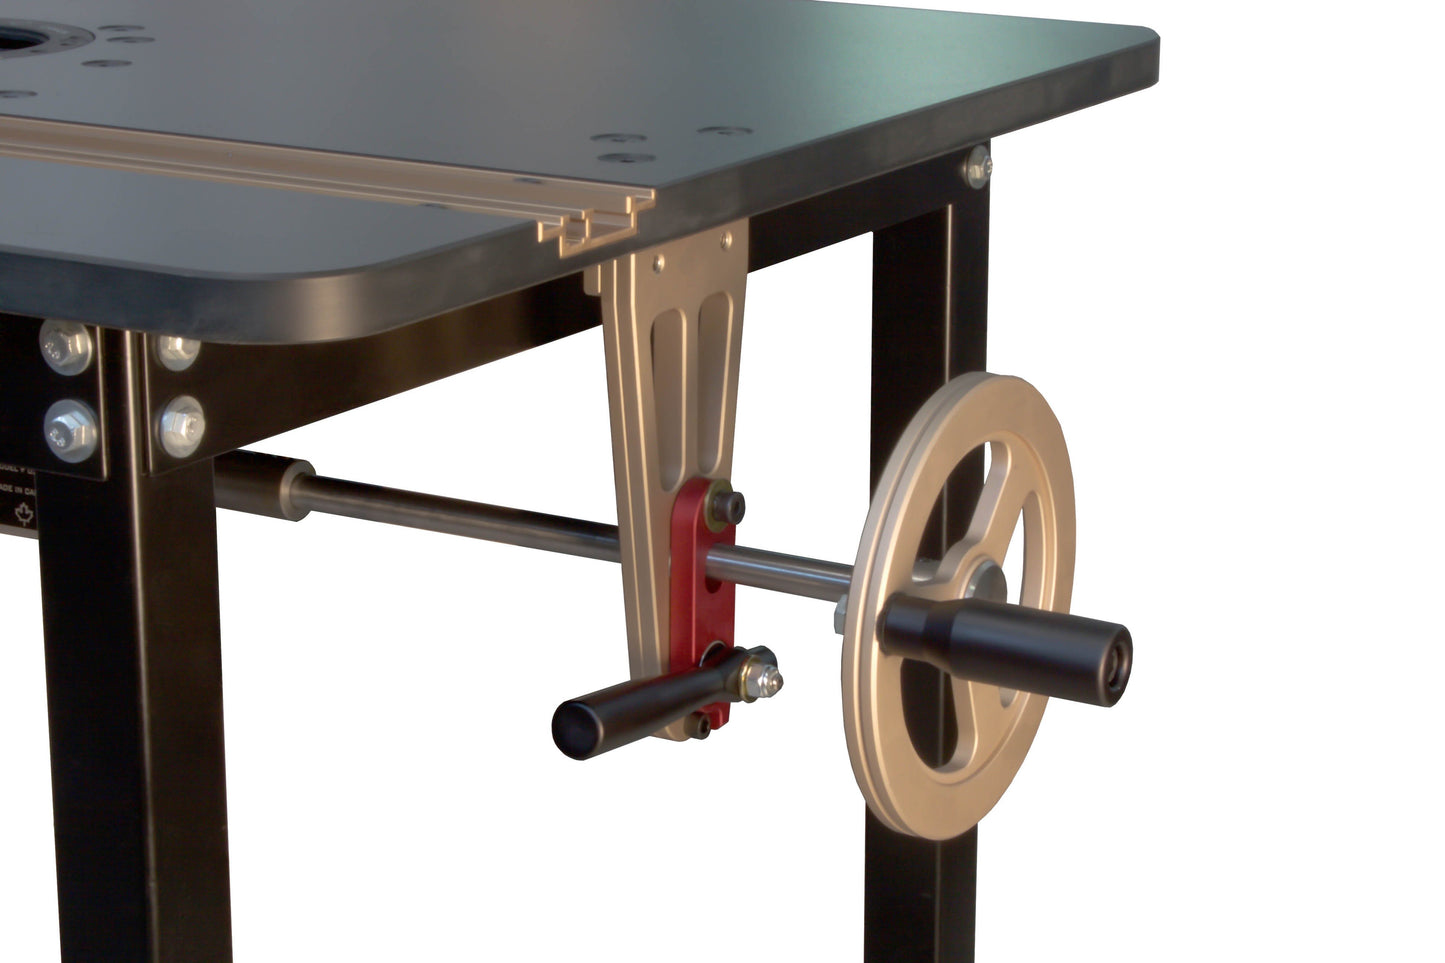 Mast-R-Lift Excel II Table Package  - THIS ITEM IS ESTIMATED TO SHIP WITHIN 4 - 6 WEEKS